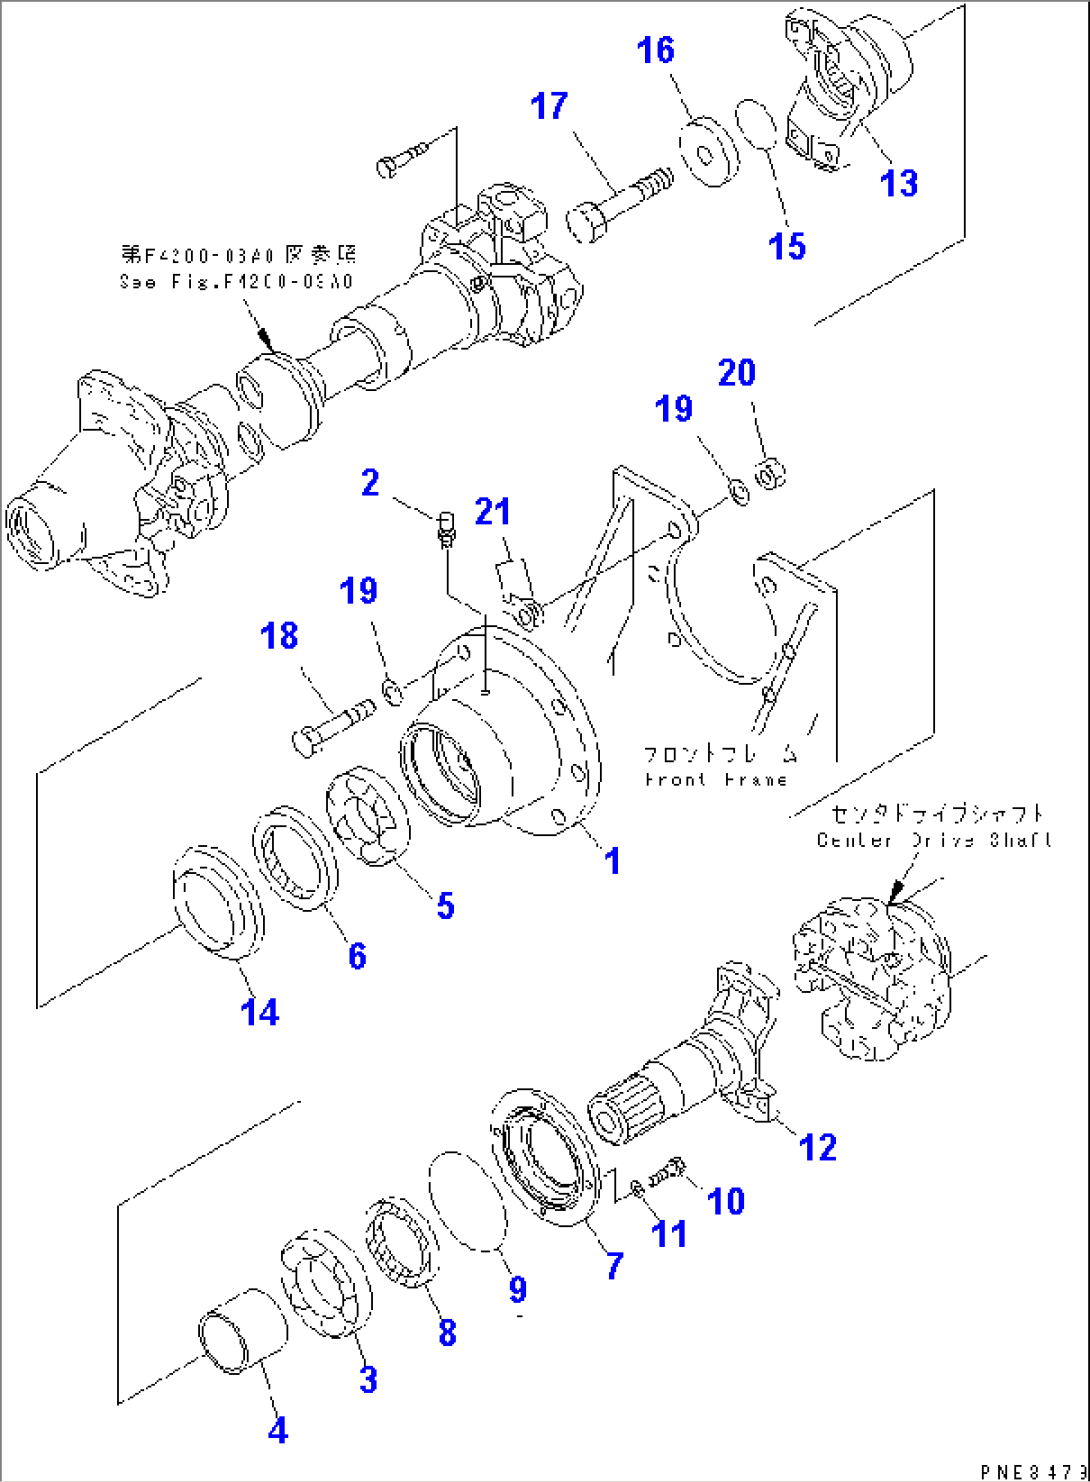 DRIVE SHAFT (FRONT AXLE SIDE¤ CENTER)